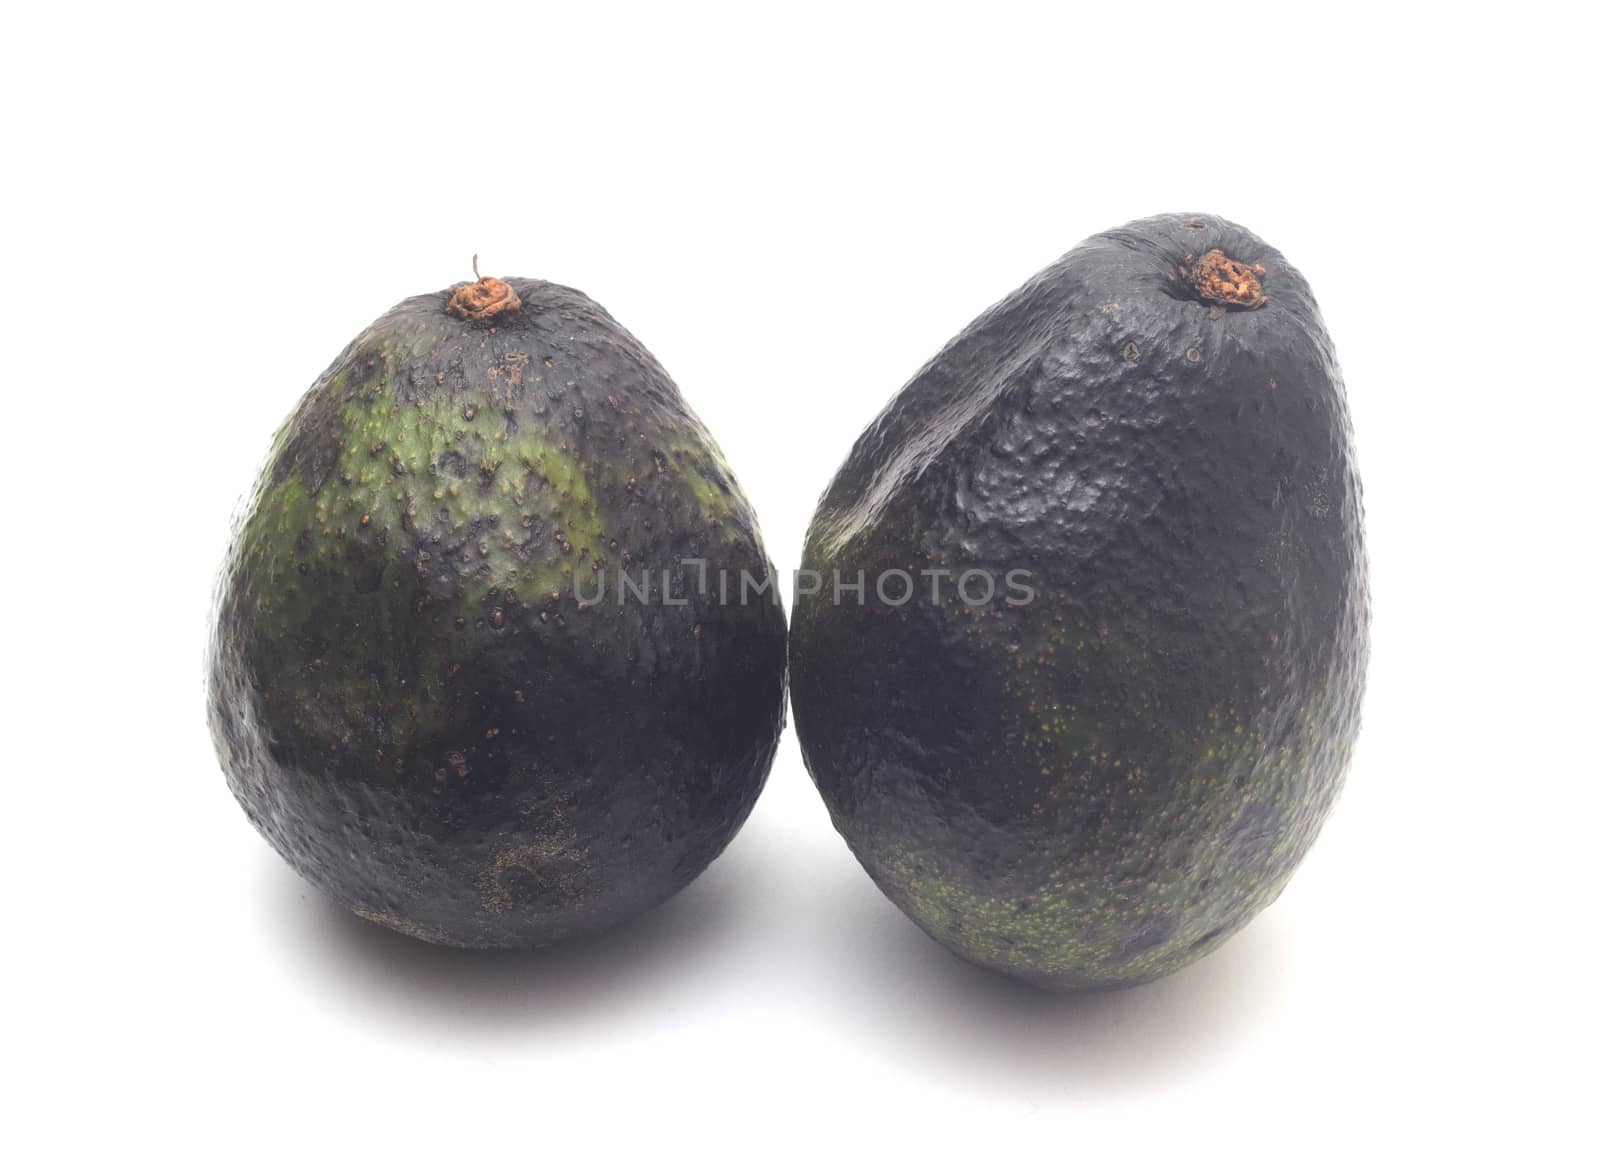 Two whole rotten avocados isolated on white background by andre_dechapelle